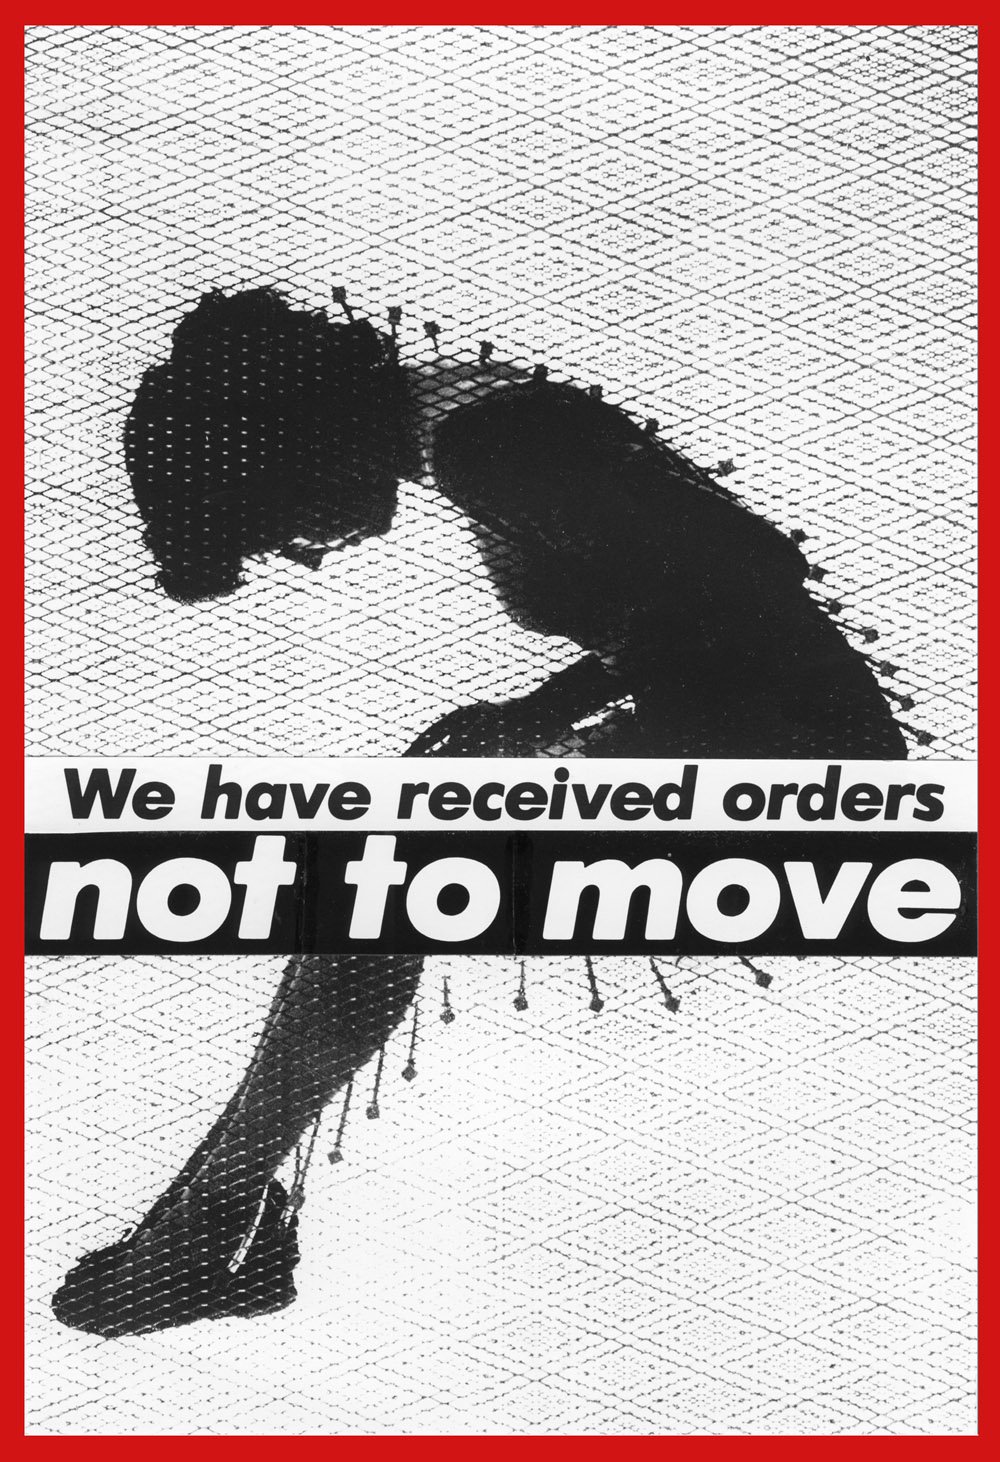 Barbara Kruger. 'Untitled (We have received orders not to move)' 1982